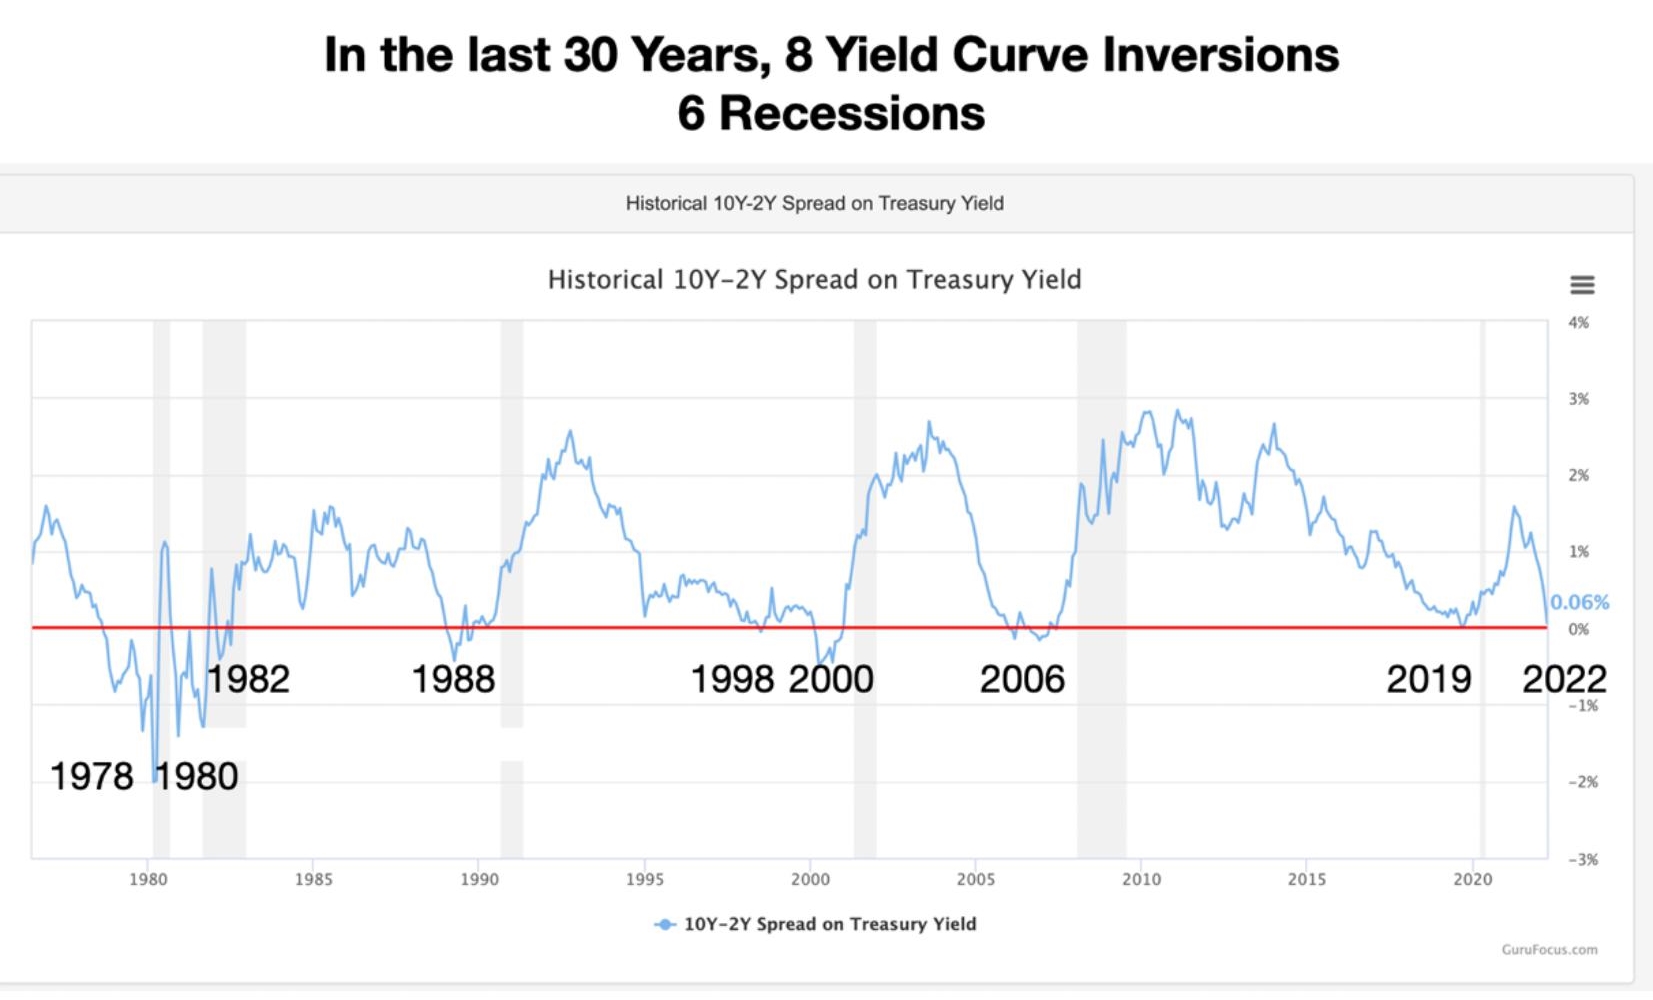 8 yield curve inversions with 6 recessions in the last 30 years